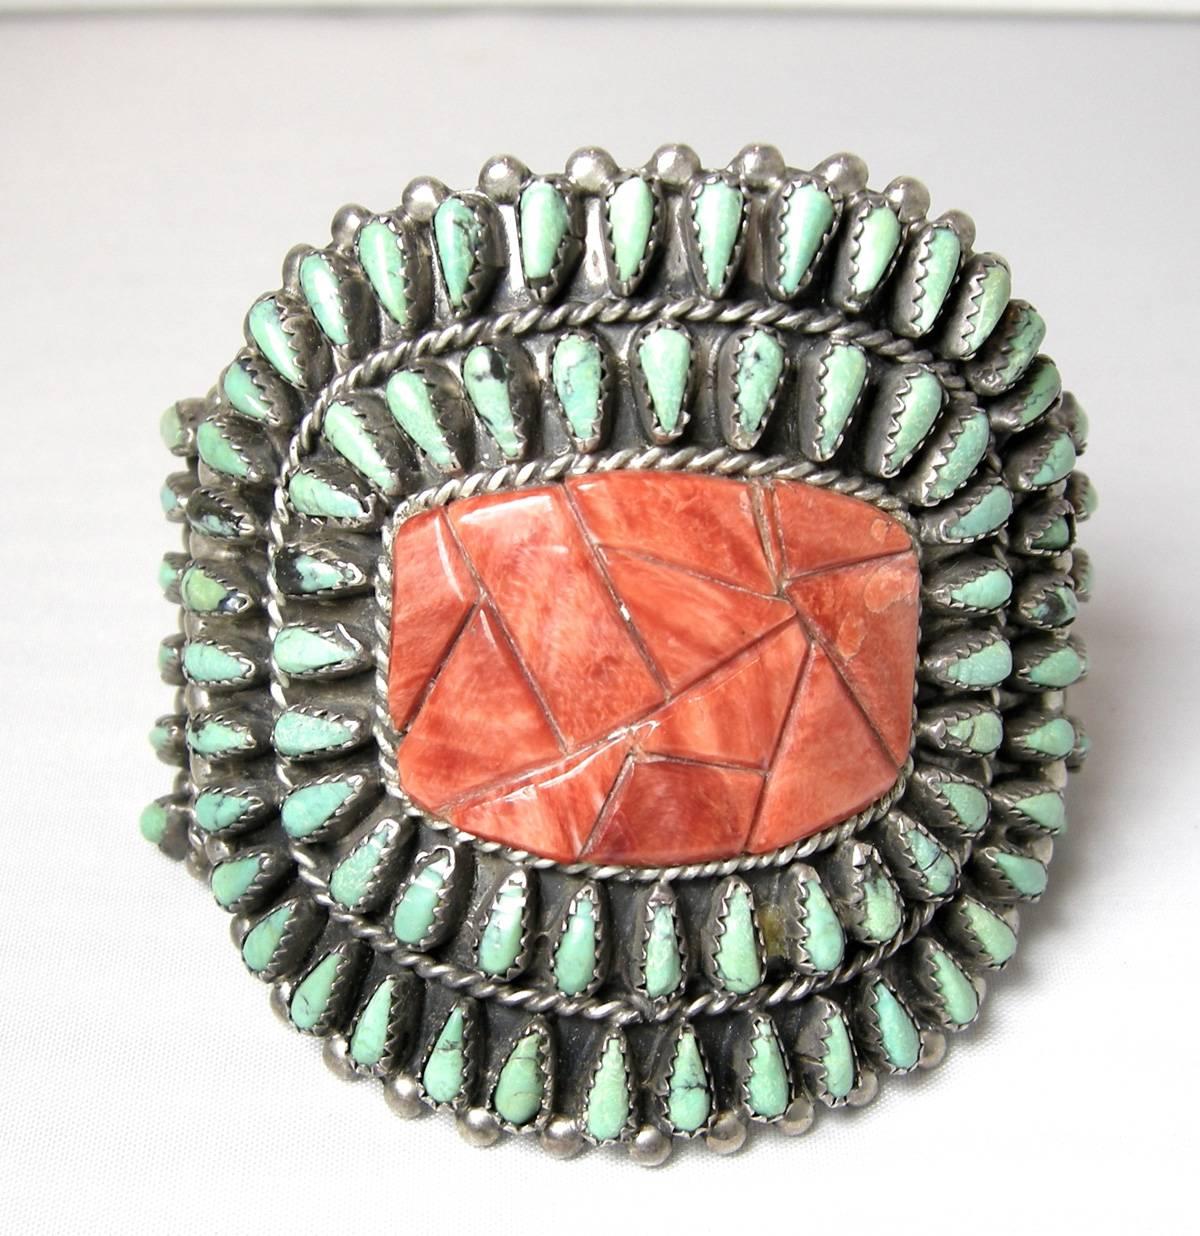 This sterling Zuni turquoise cuff has a needlepoint design on the outside with a carved coral center.  All the turquoise stones are bezel set with sterling rims.  It measures 2-1/2” x 2-1/2